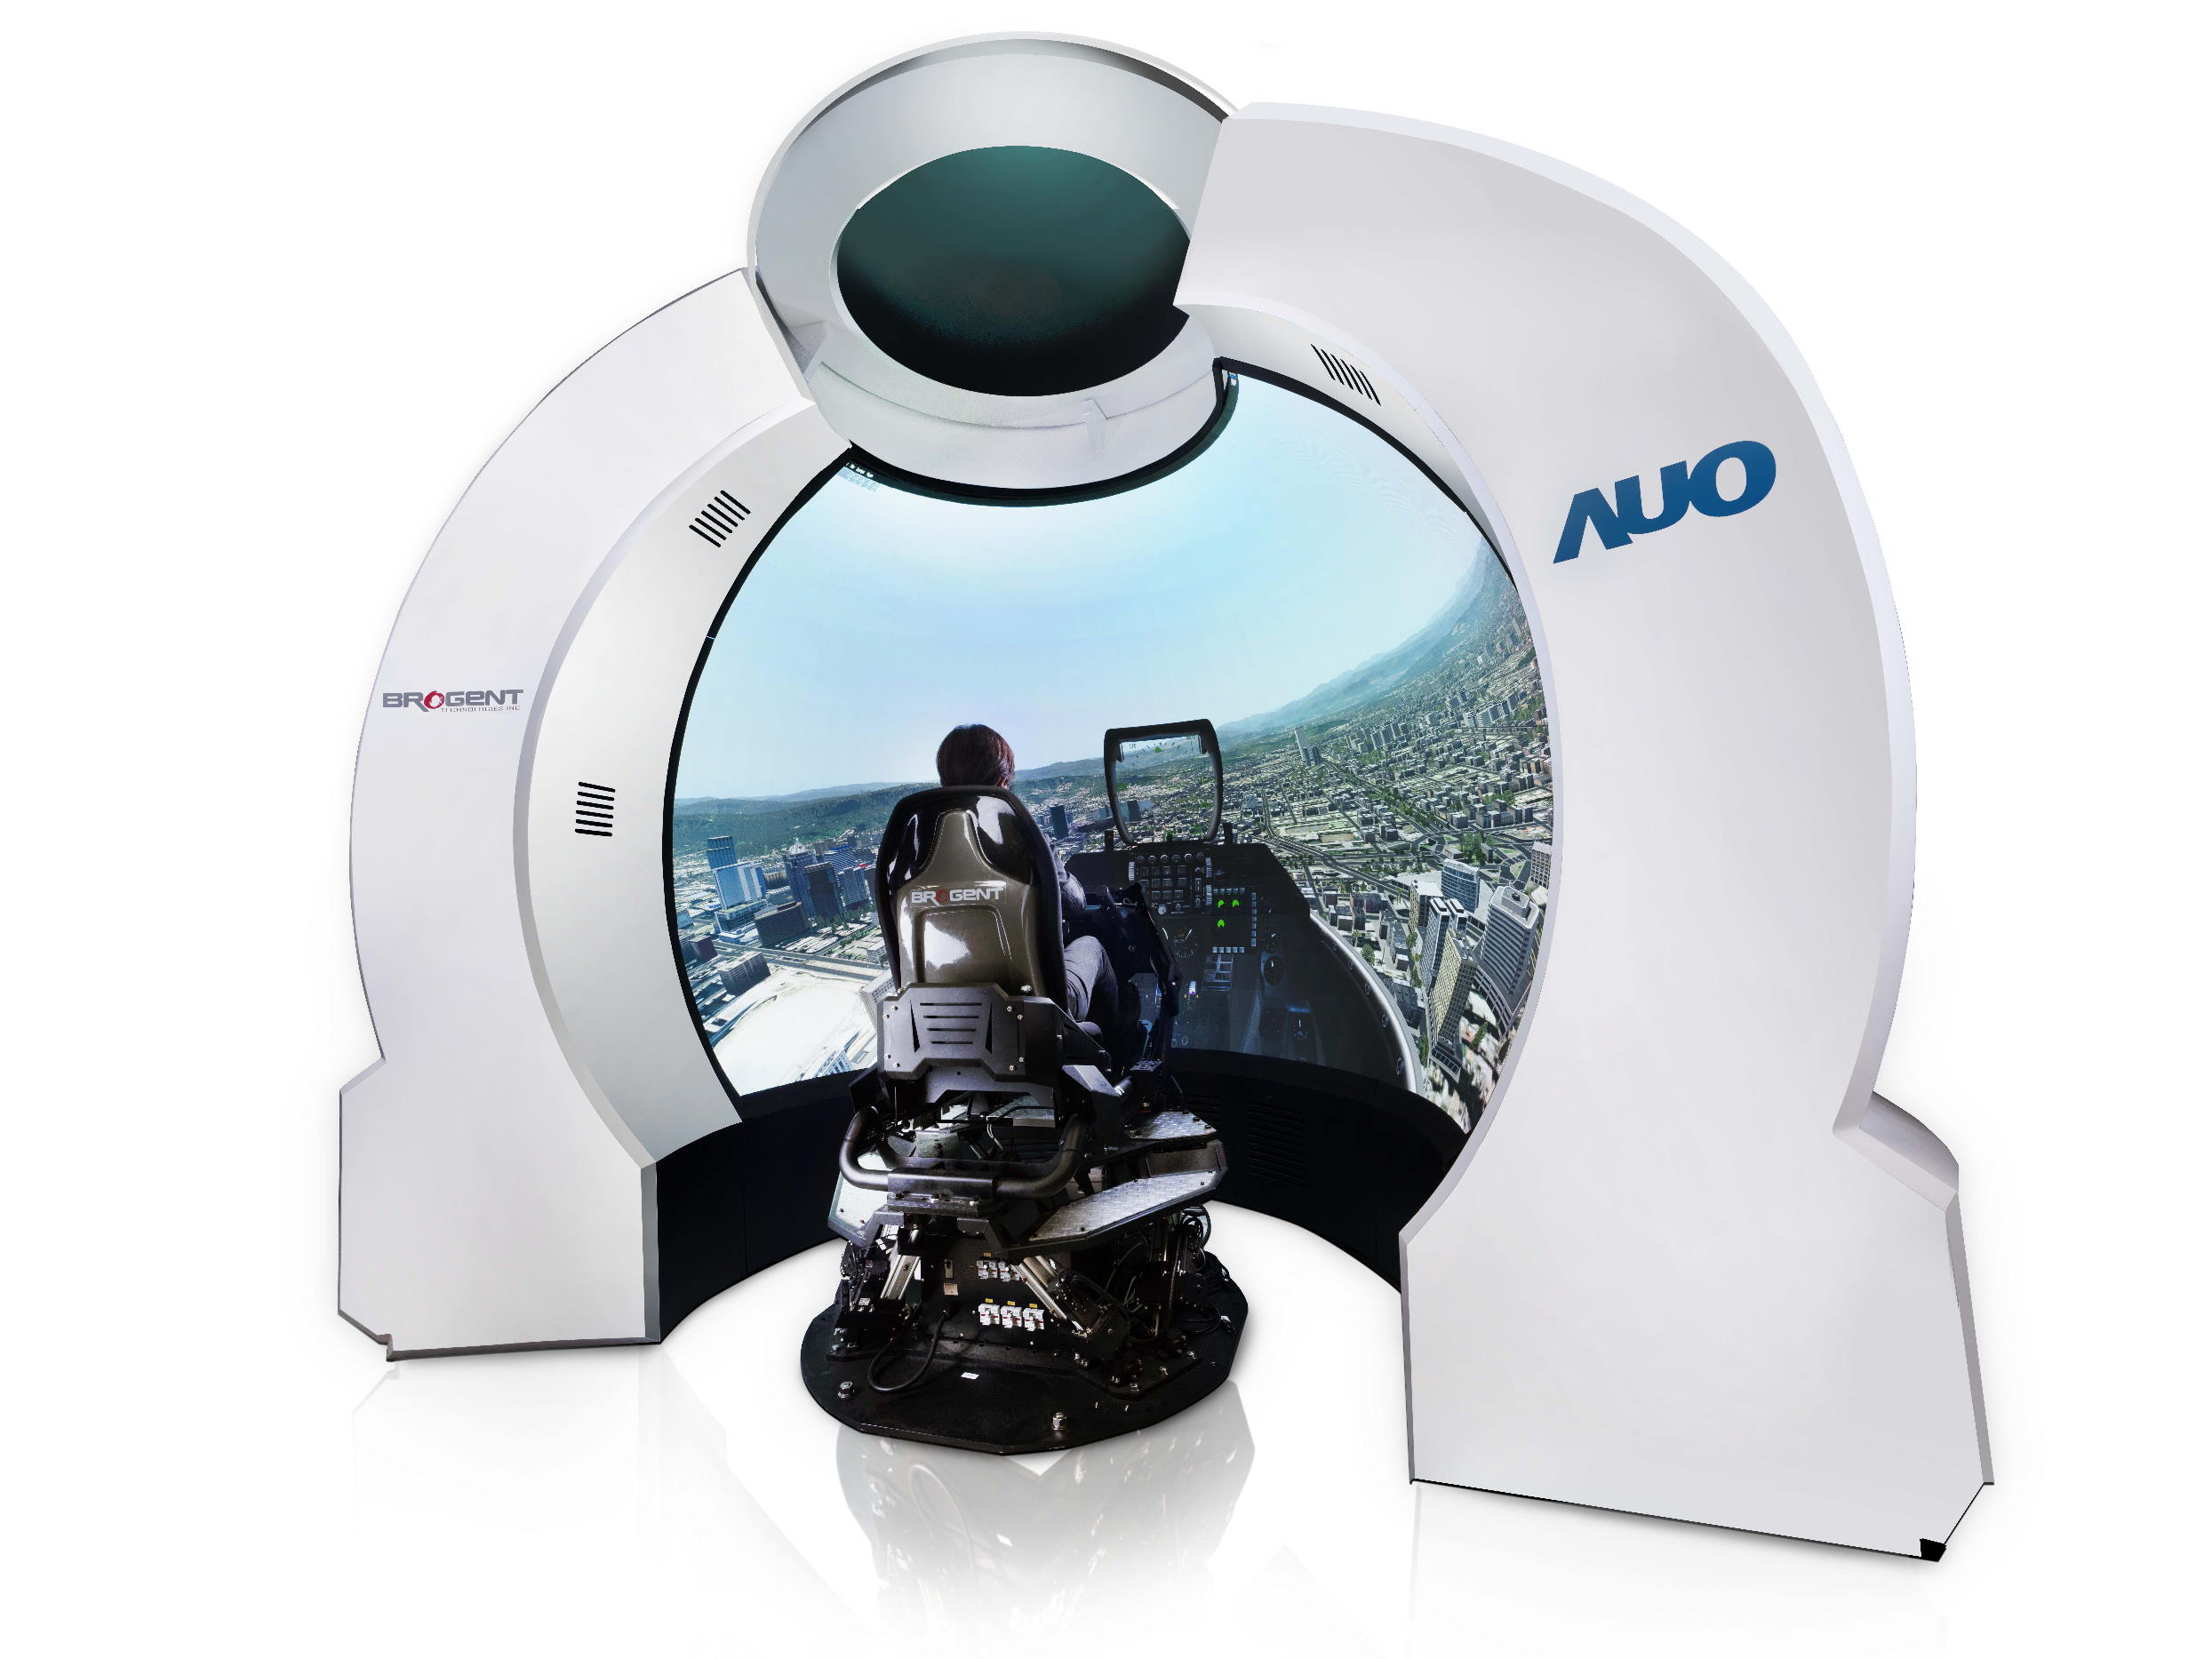 ALED Spherical Tiled Display-AUO Corporation